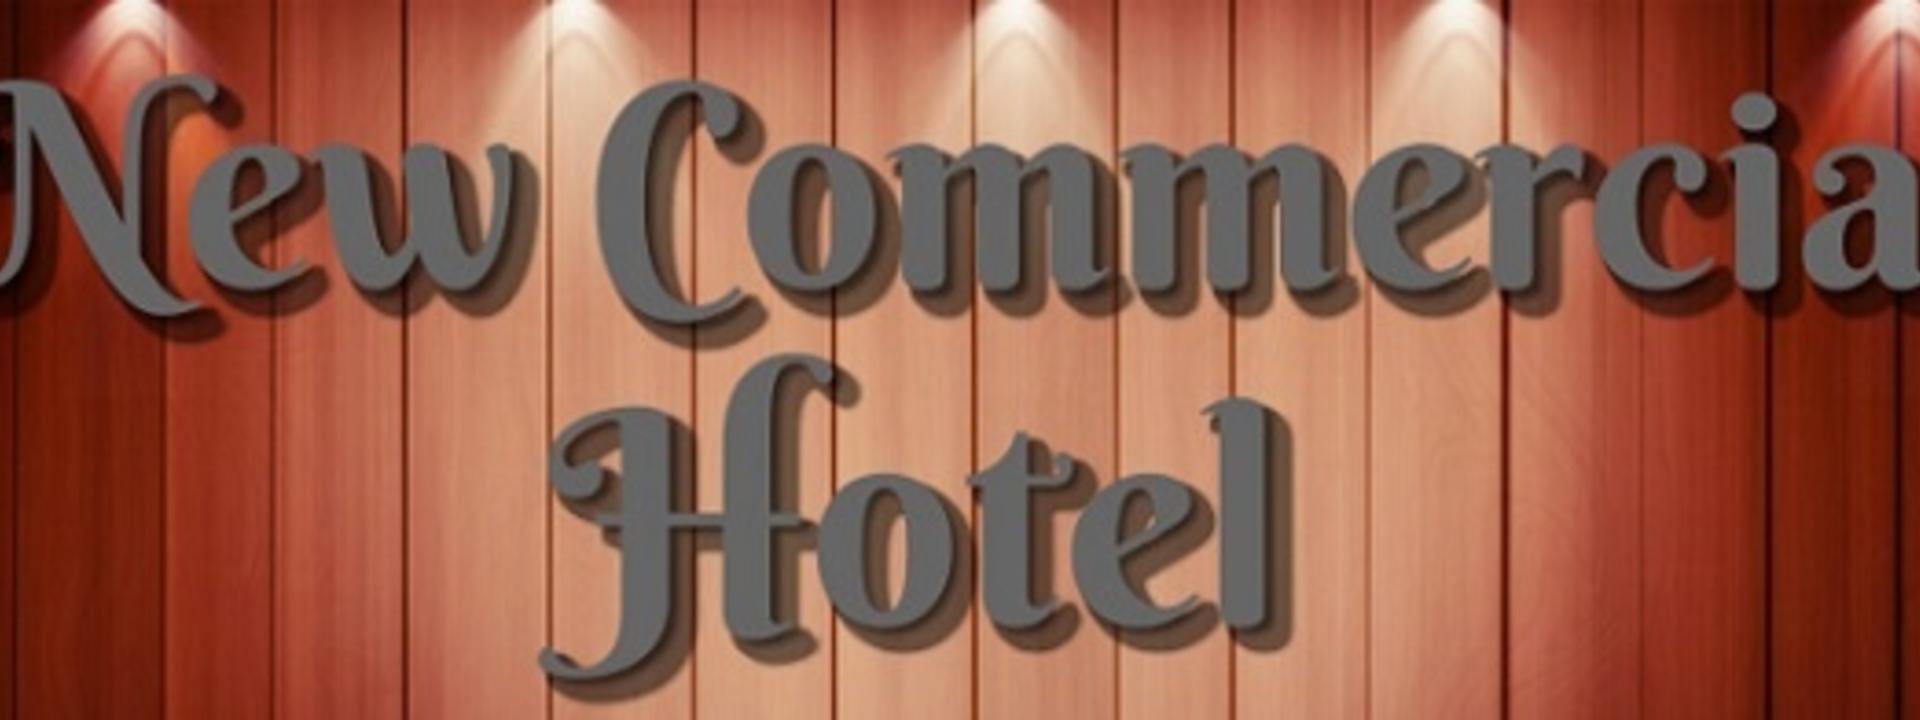 Logo: New Commercial Hotel